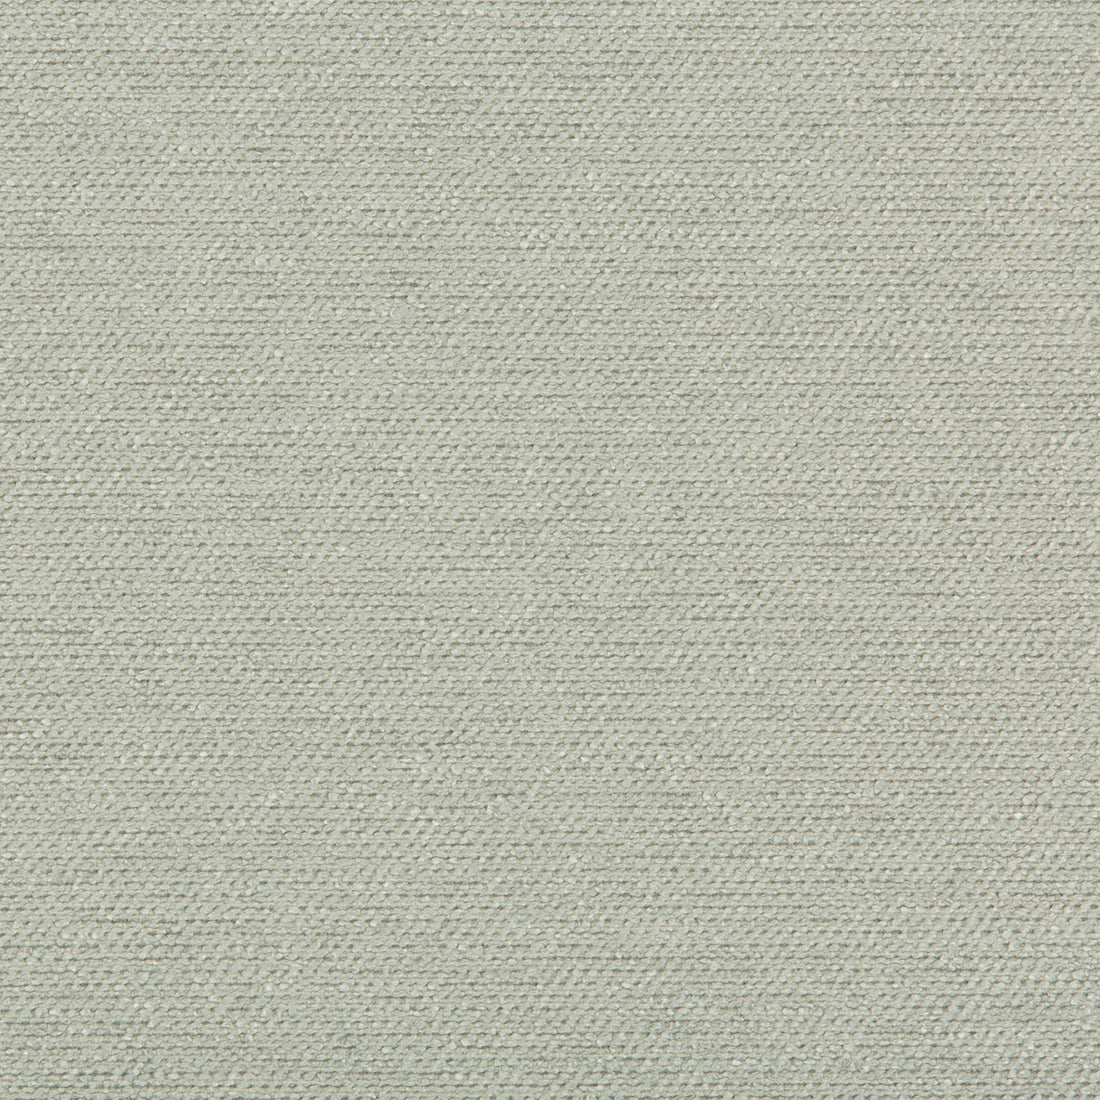 Kravet Design fabric in 35143-11 color - pattern 35143.11.0 - by Kravet Design in the Performance Crypton Home collection